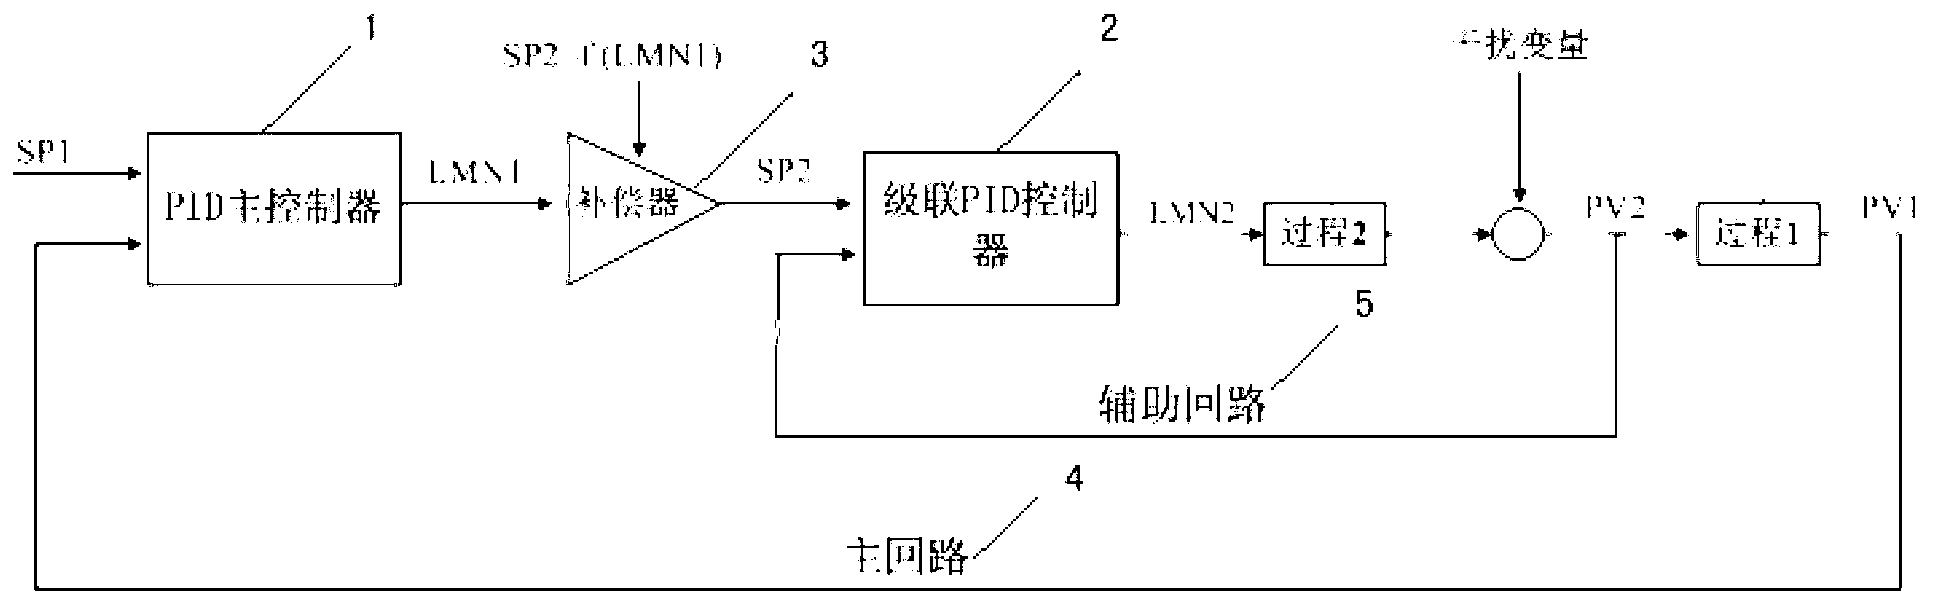 Charging moisture control method for tobacco shred processing